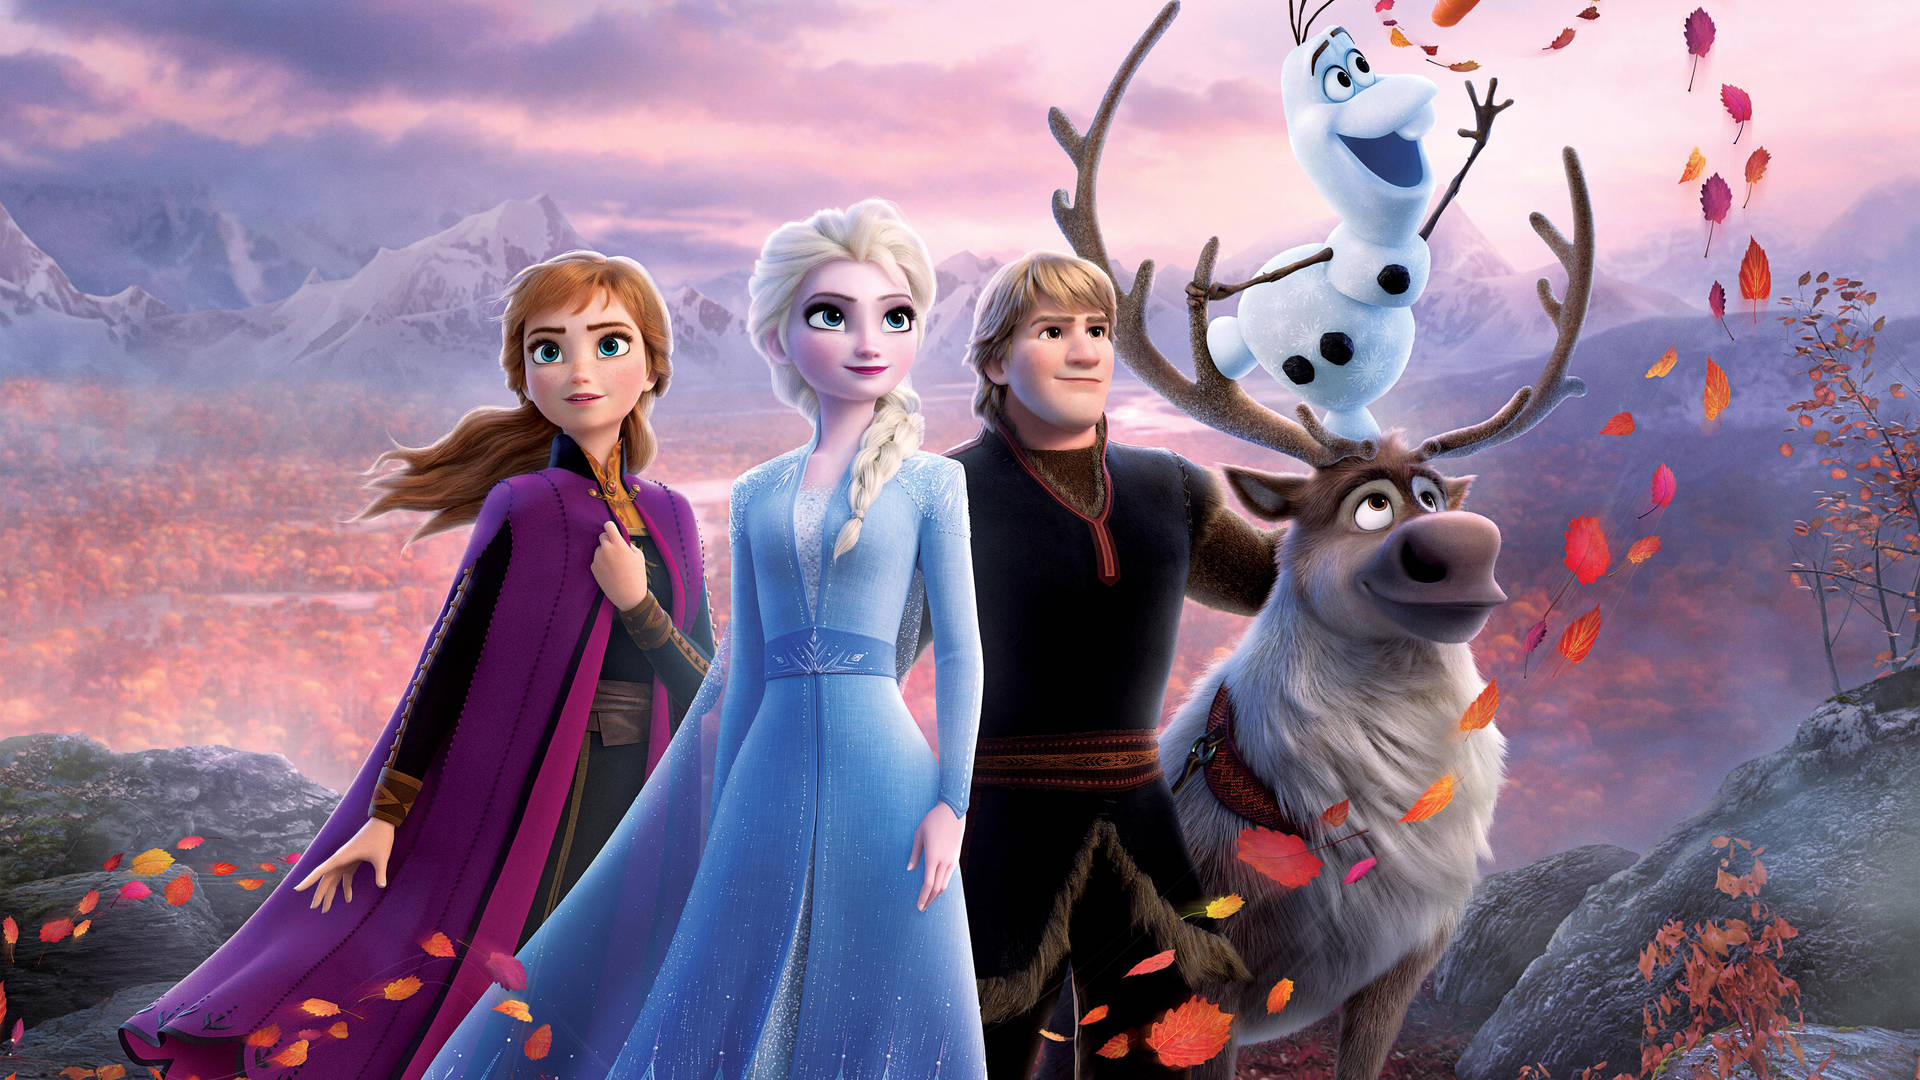 Elsa And Anna With Friends Background